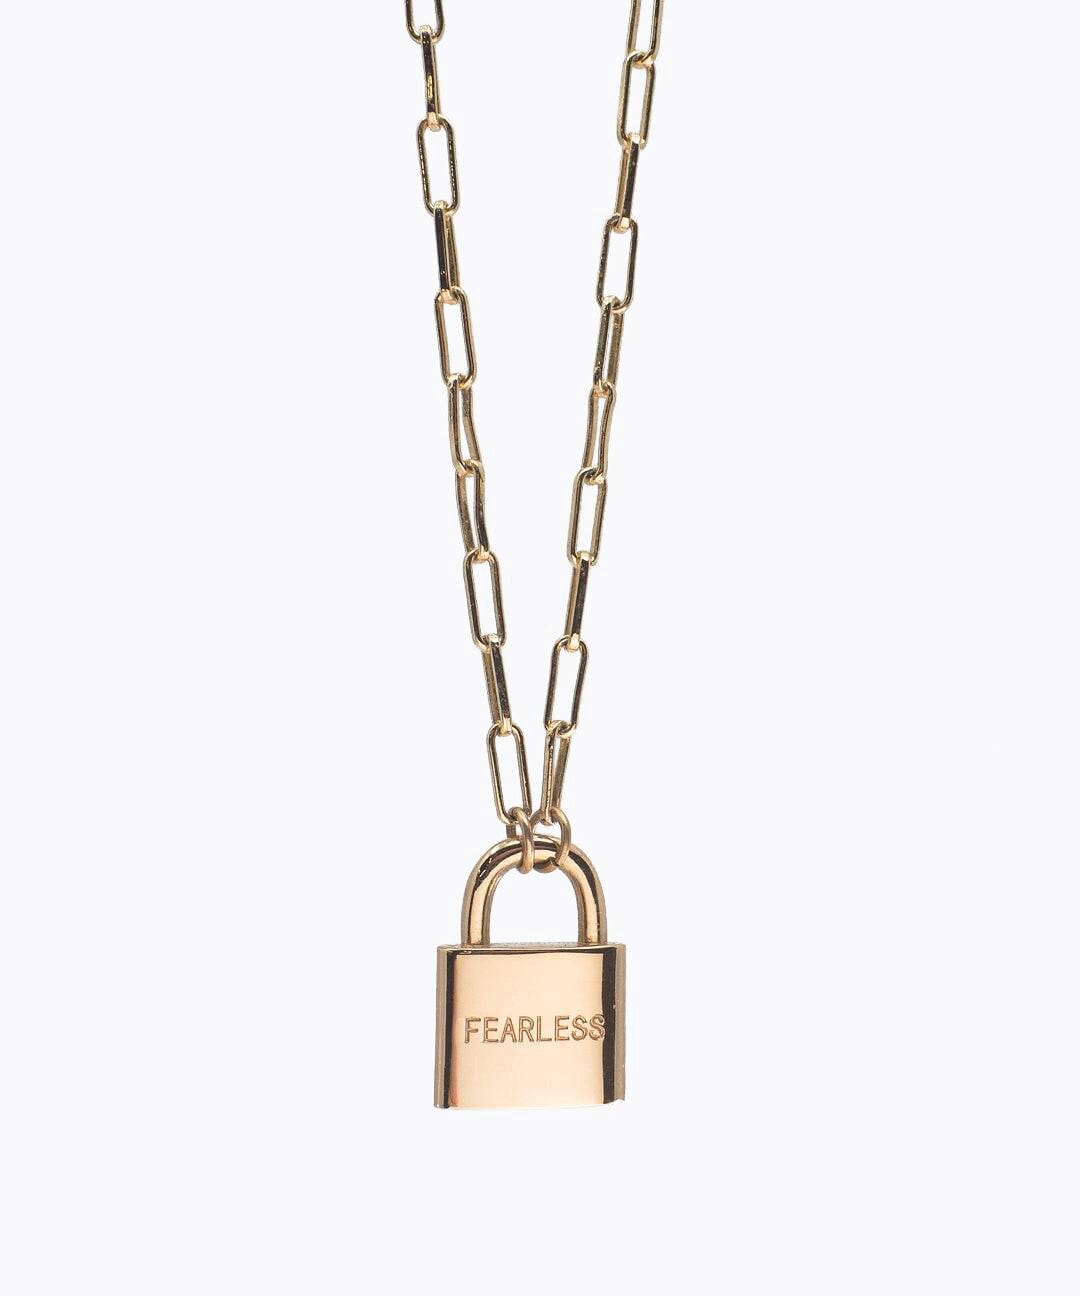 Lock Necklace, Gold Necklaces for Women